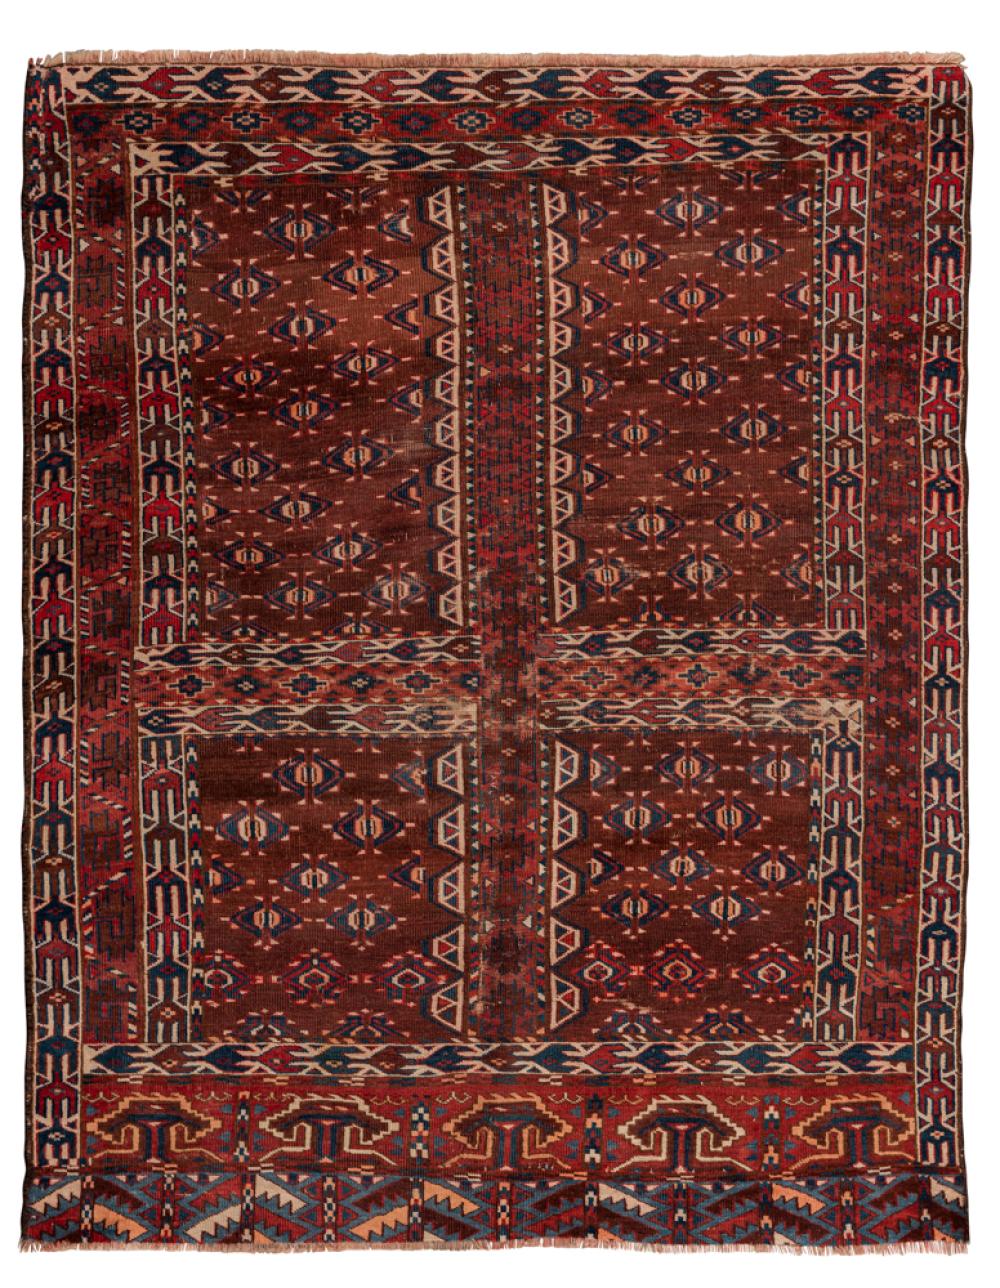 A TURKOMAN ENGIS RUG, CENTRAL ASIA, LATE 19TH CENTURY